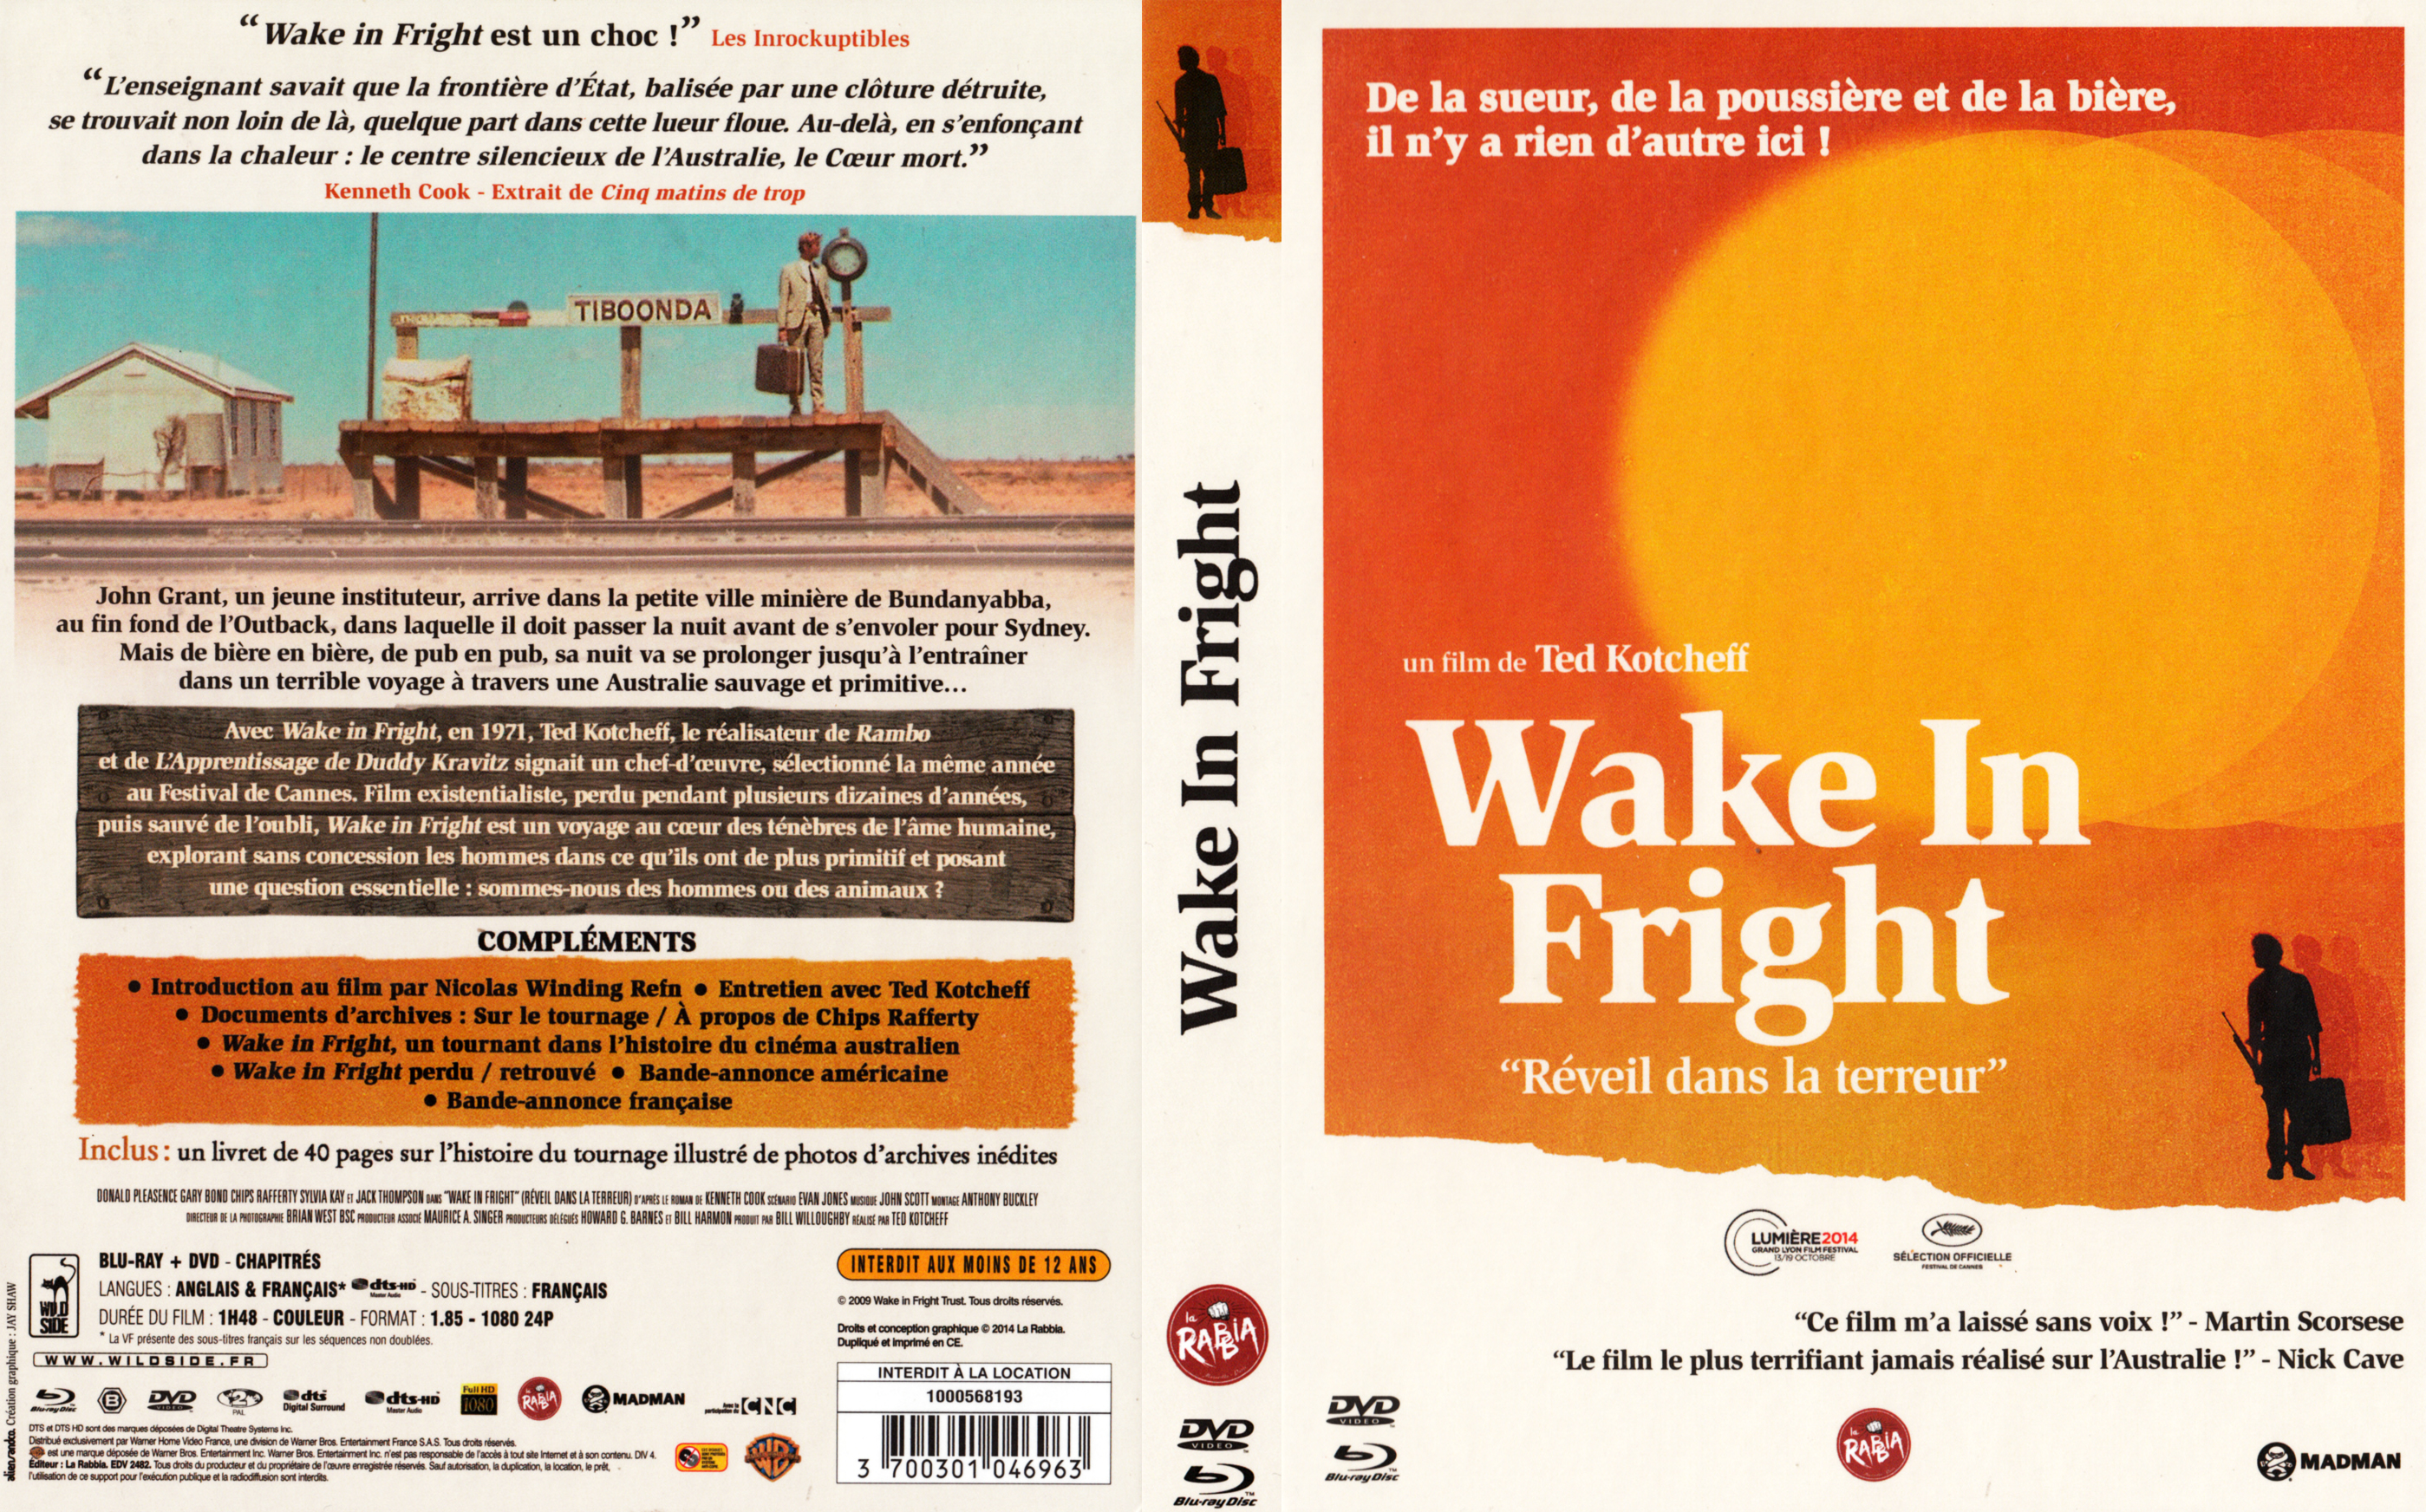 Jaquette DVD Wake in fright